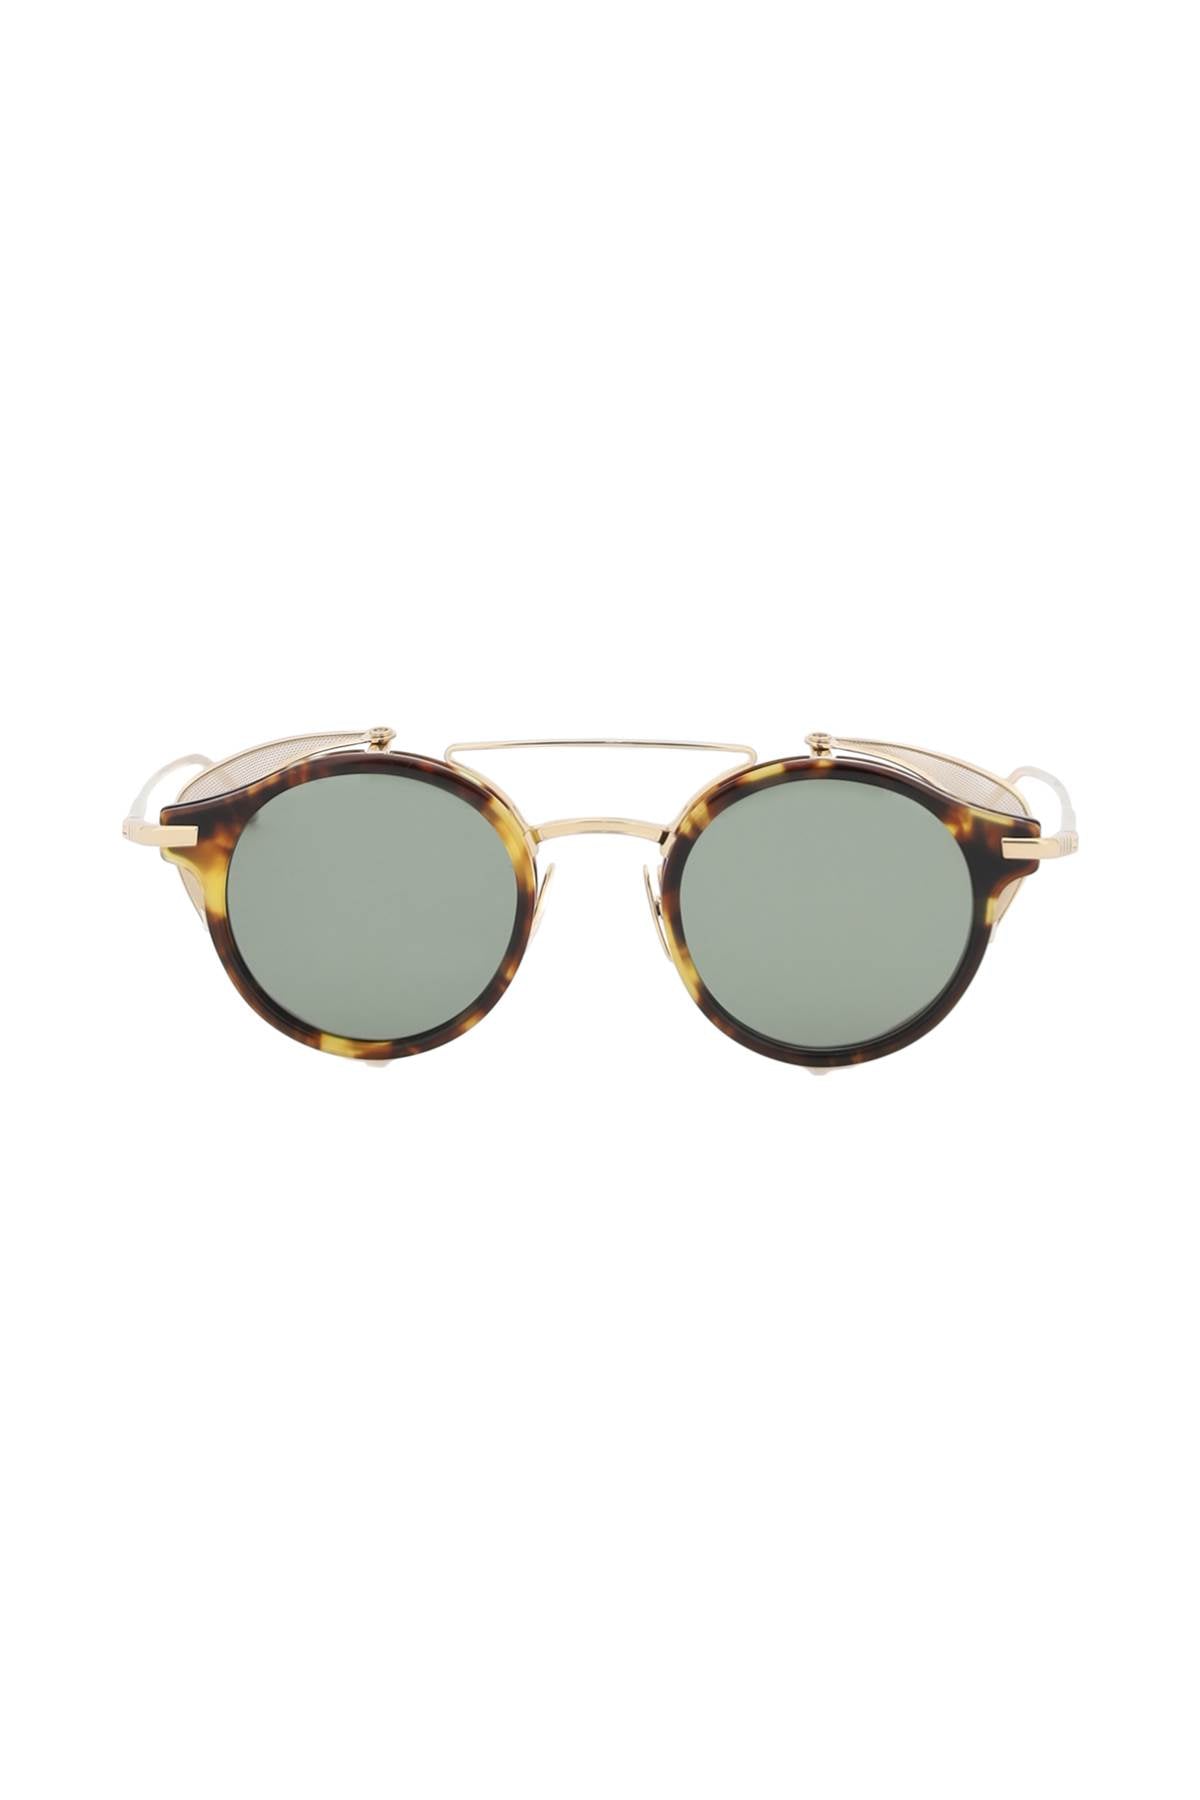 THOM BROWNE Mens Eye Protection Sunglasses with Tortoiseshell Frame and Grid Side Shields